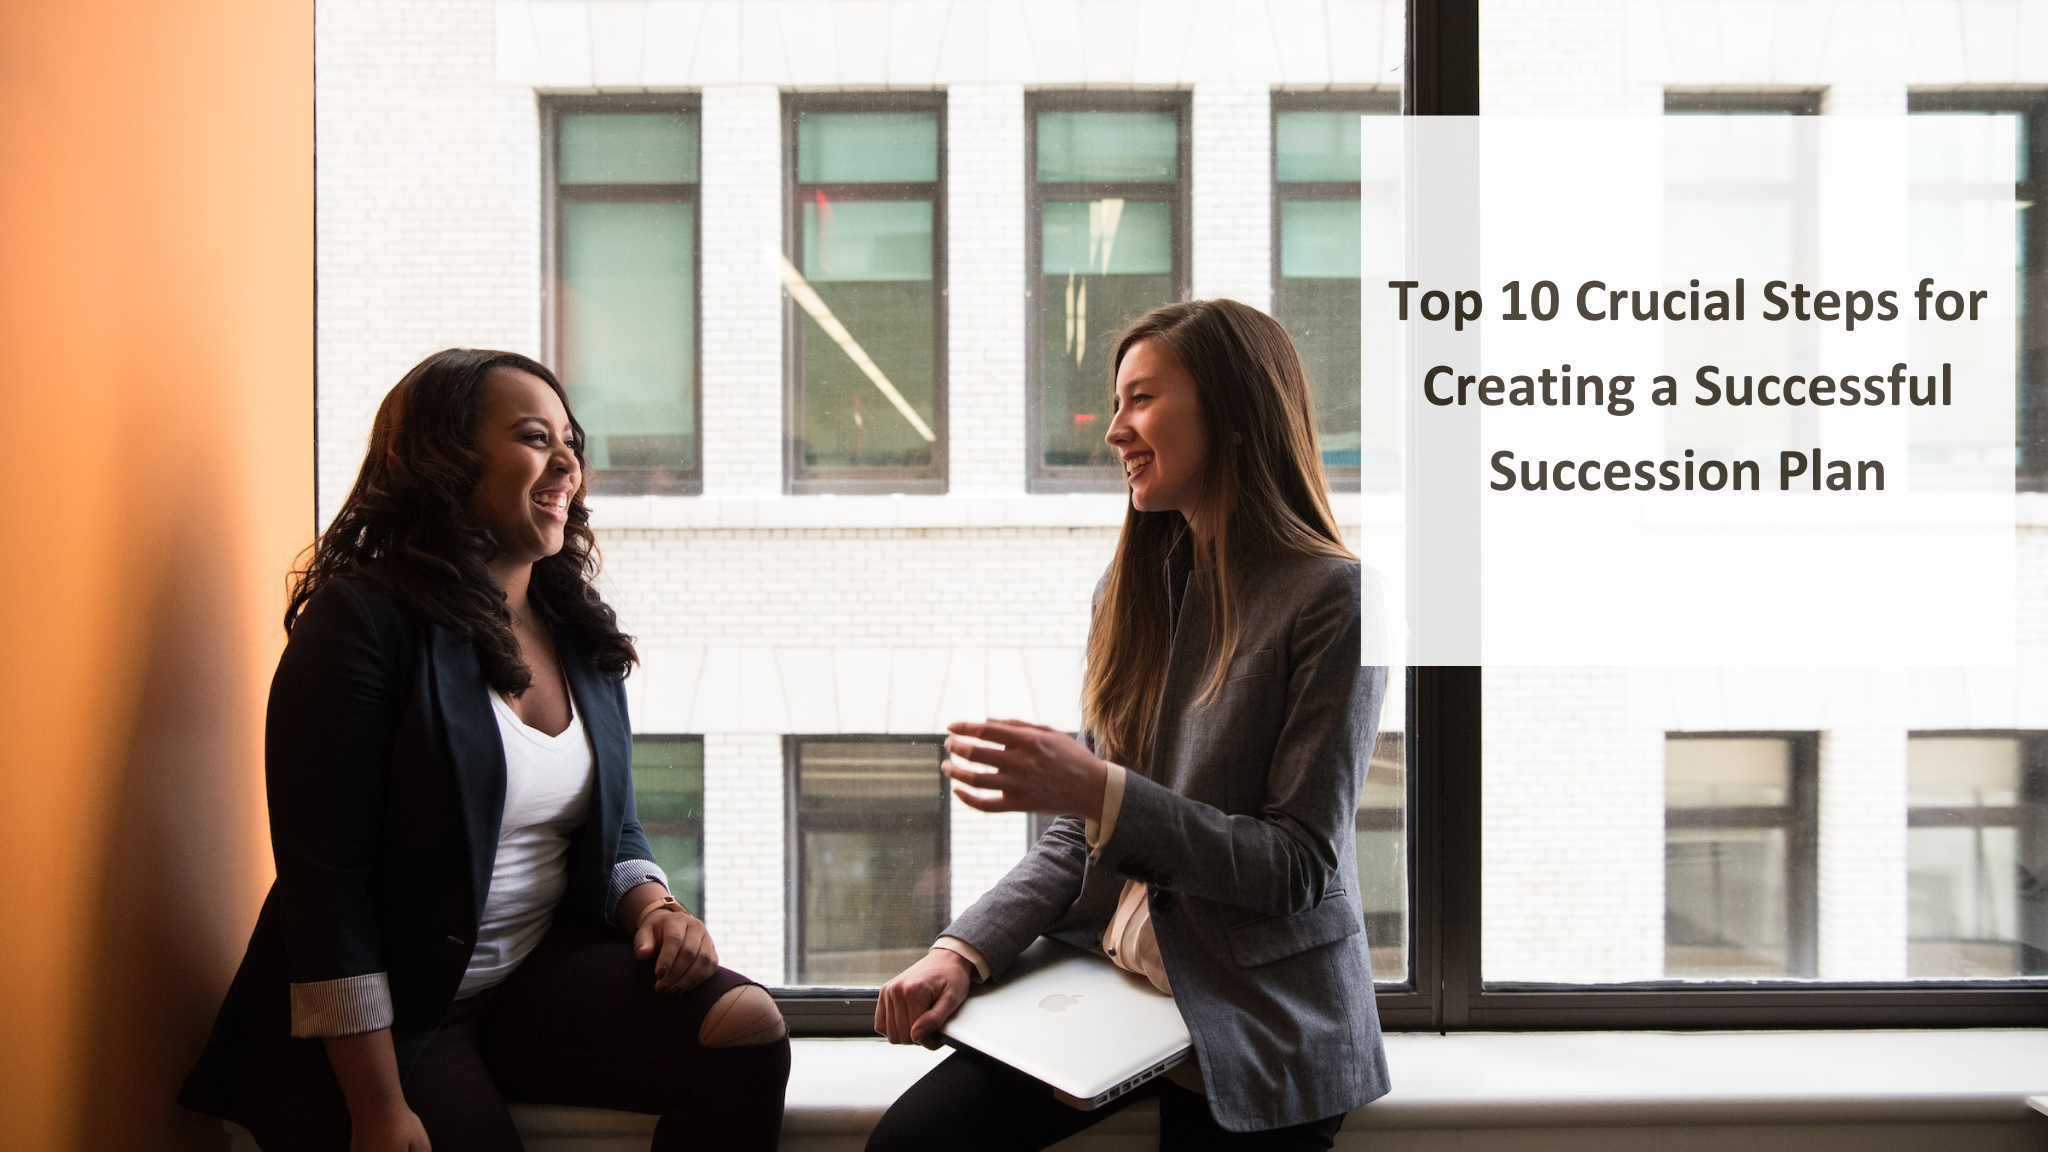 Top 10 Crucial Steps for Creating a Successful Succession Plan